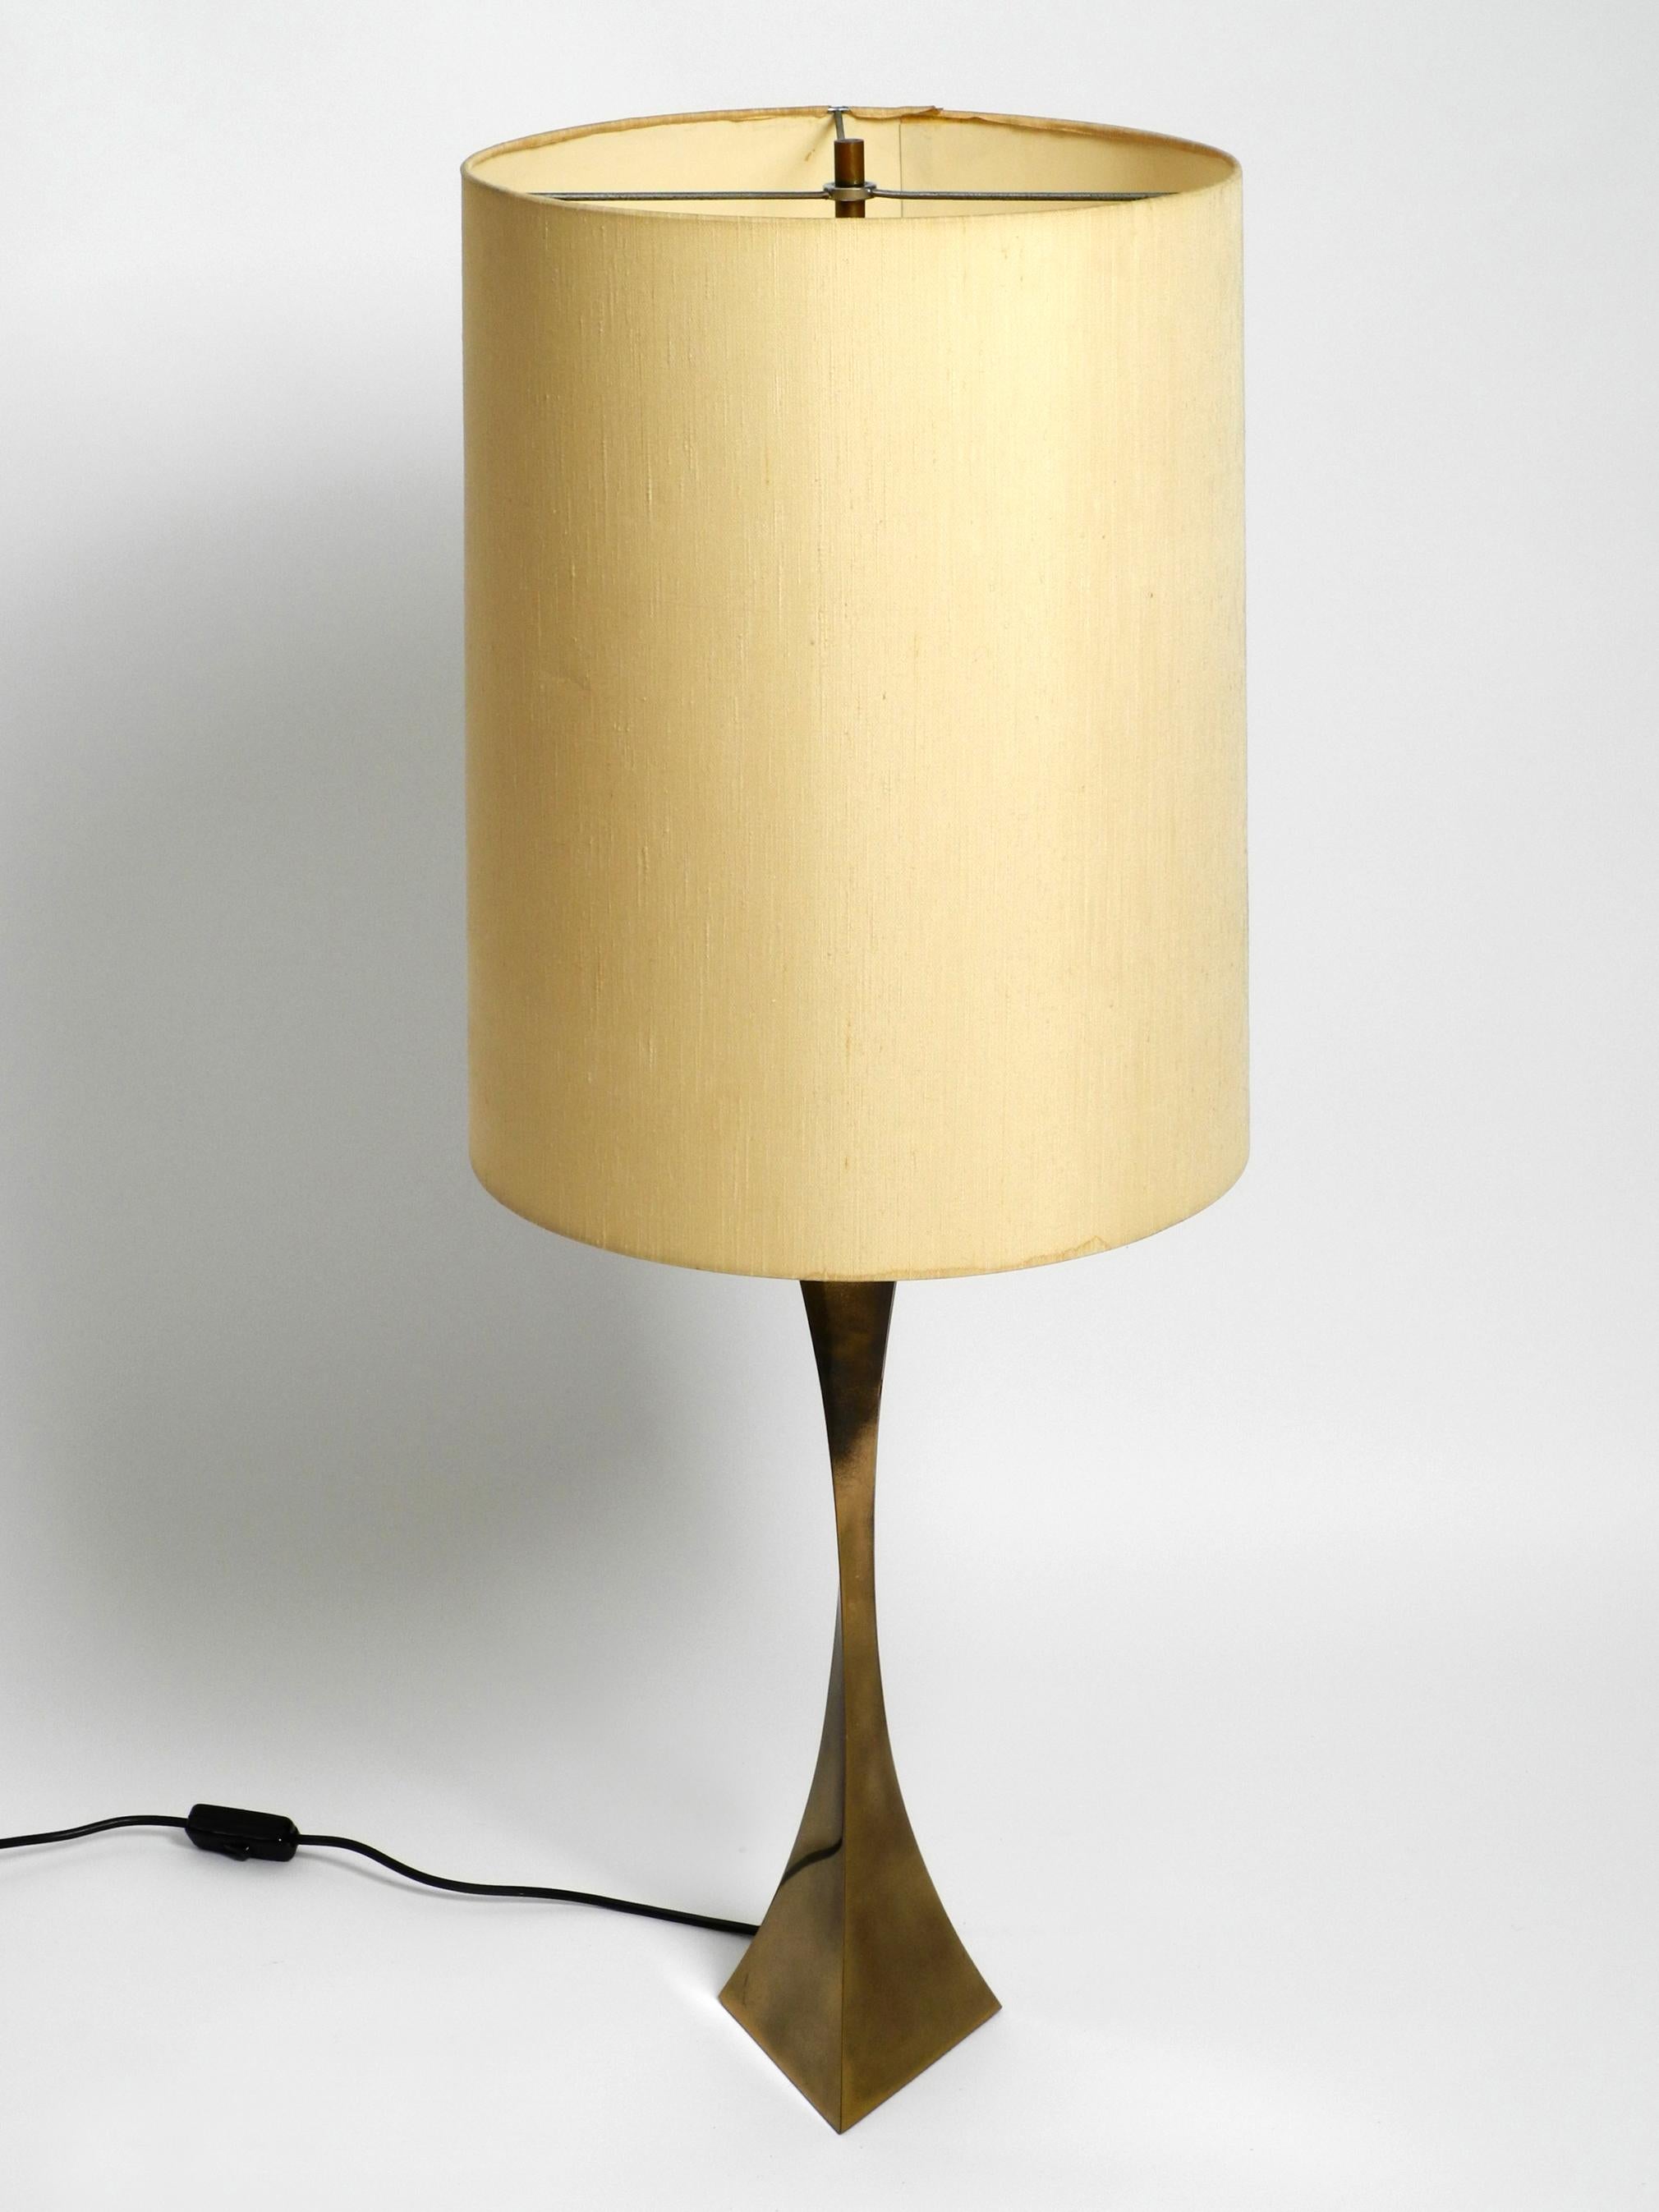 Very rare large 1970s brass table lamp. Designed by Tonello and Montagna Grillo for High Society.
Made in Italy. Great, very elegant Italian design in its original vintage condition.
Base and neck made entirely of brass. Beautiful original